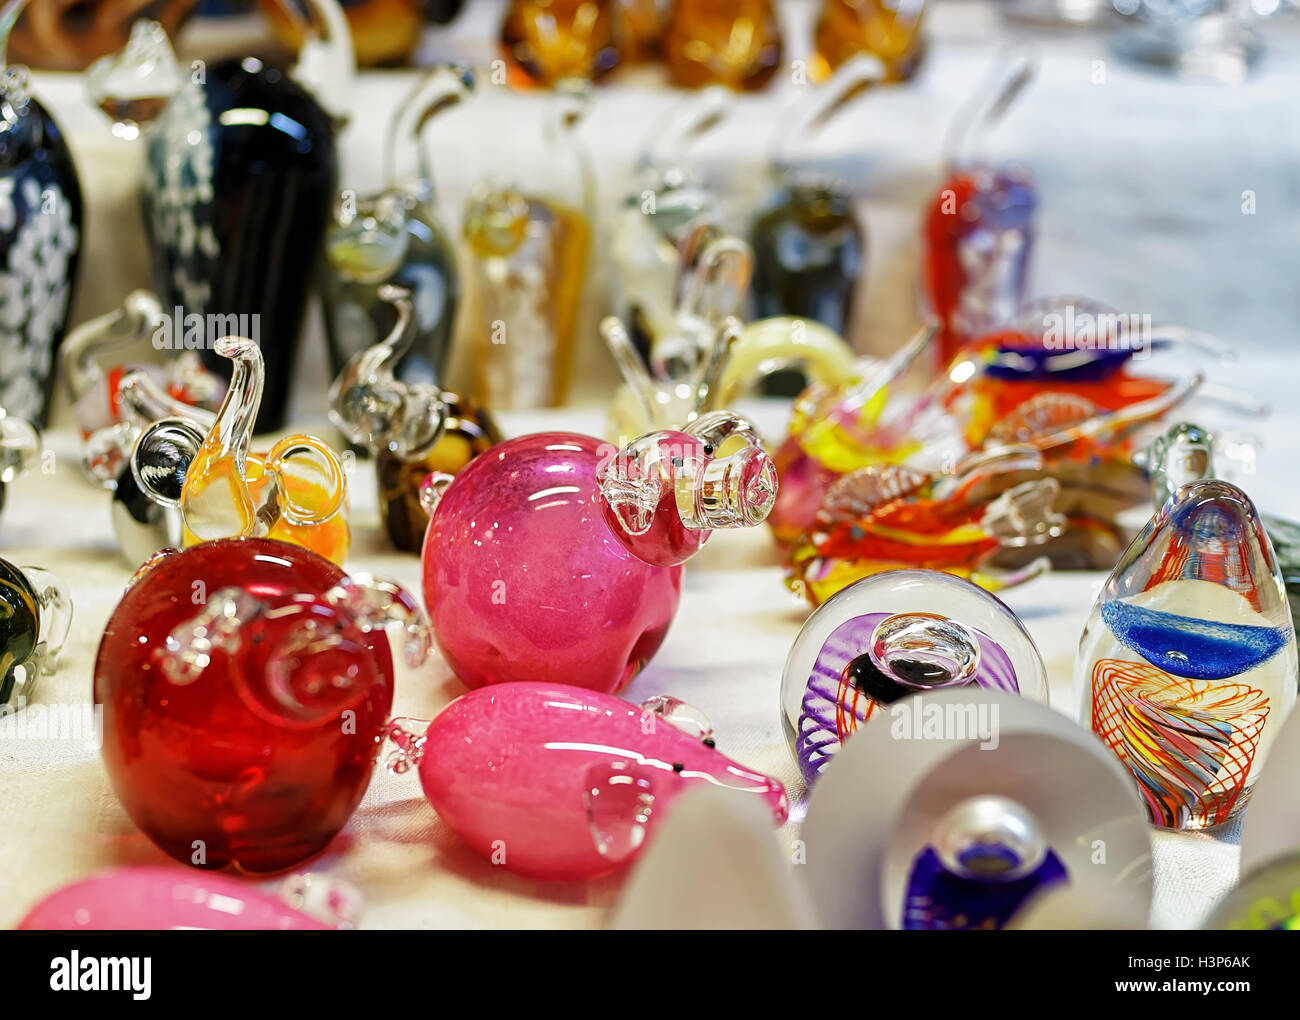 Small glass figurines displayed for sale at the Christmas market in old Riga, Latvia. The market takes place from the beginning of December till the start of January each year. Stock Photo